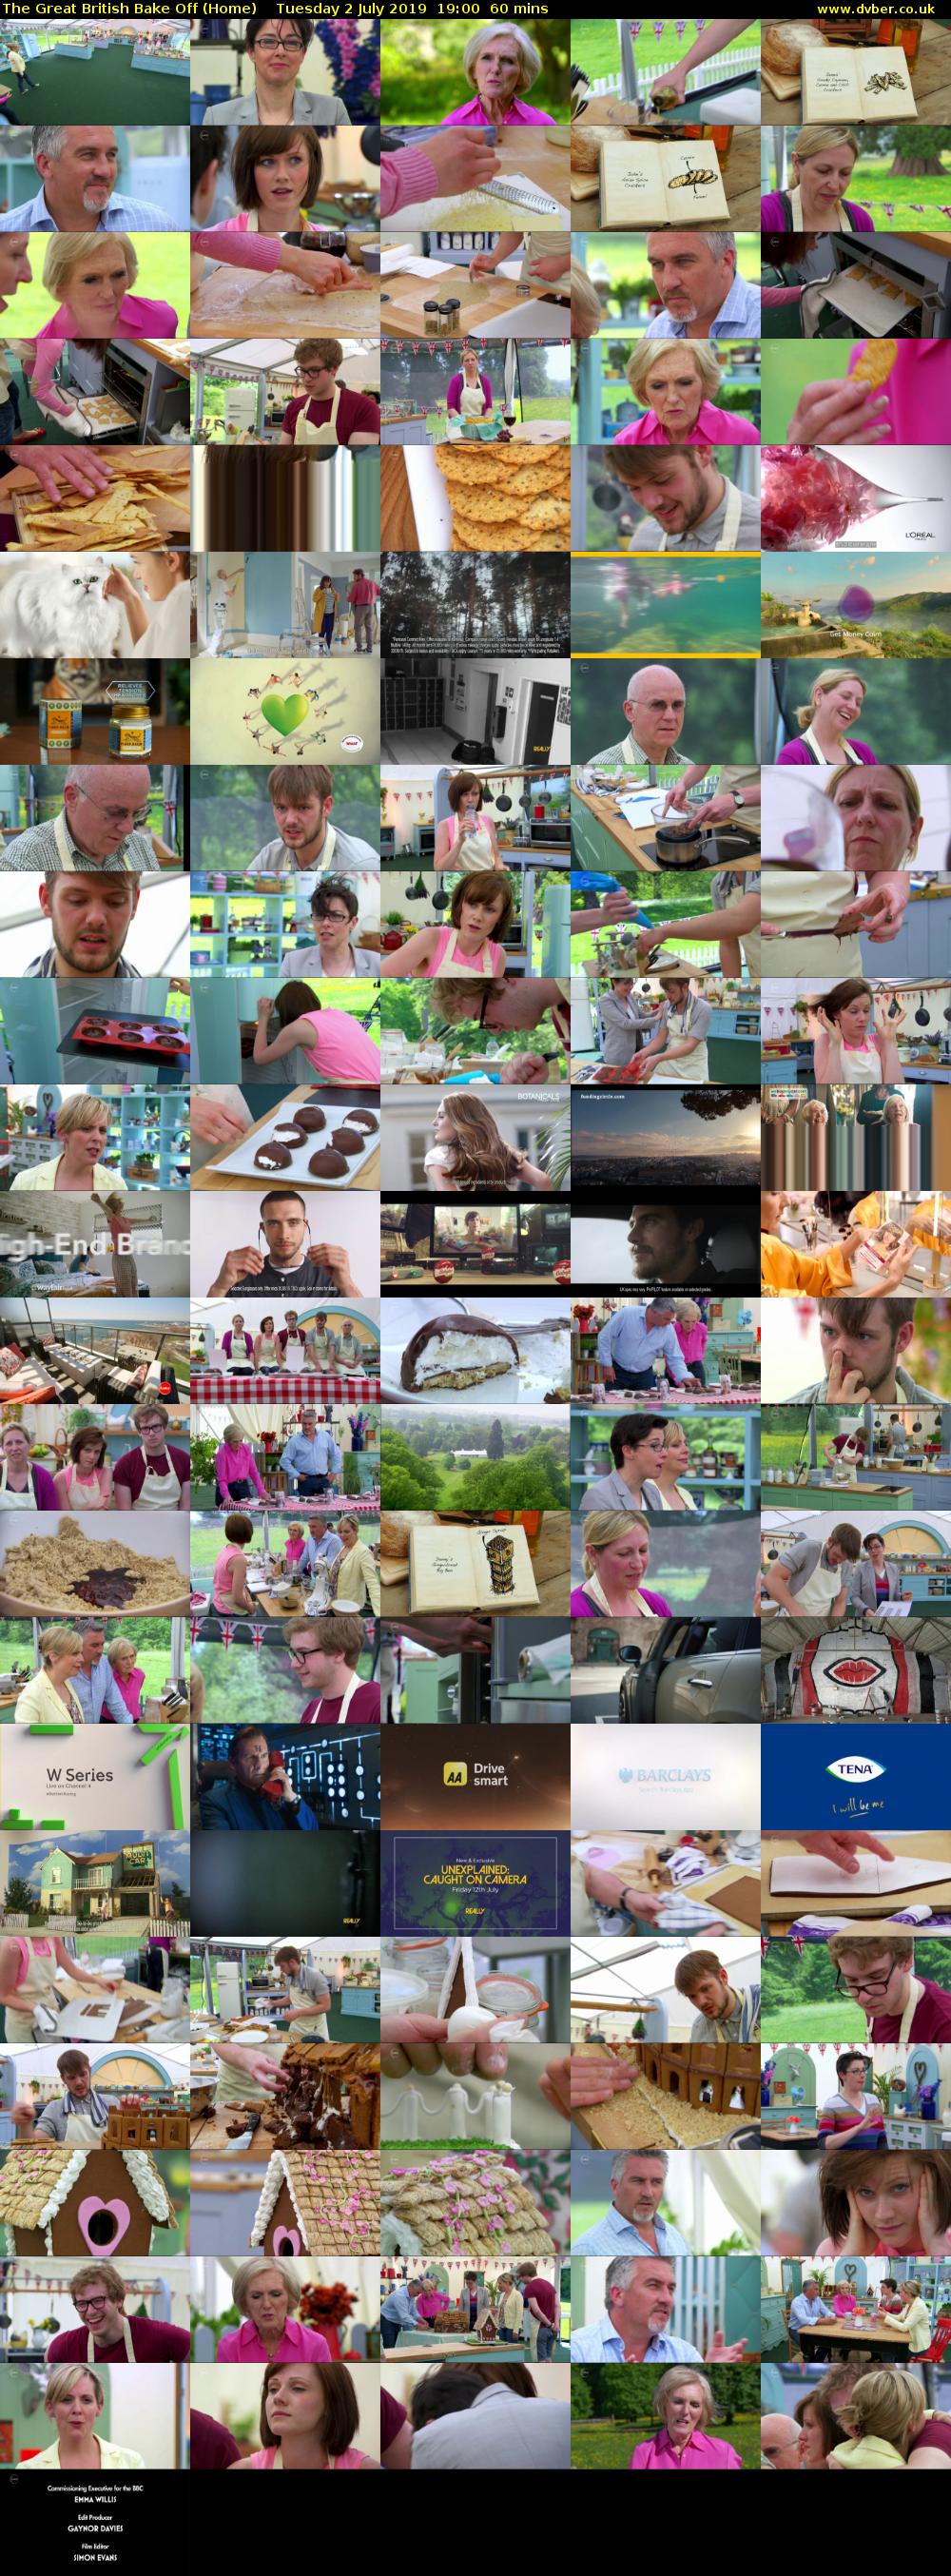 The Great British Bake Off (Home) Tuesday 2 July 2019 19:00 - 20:00